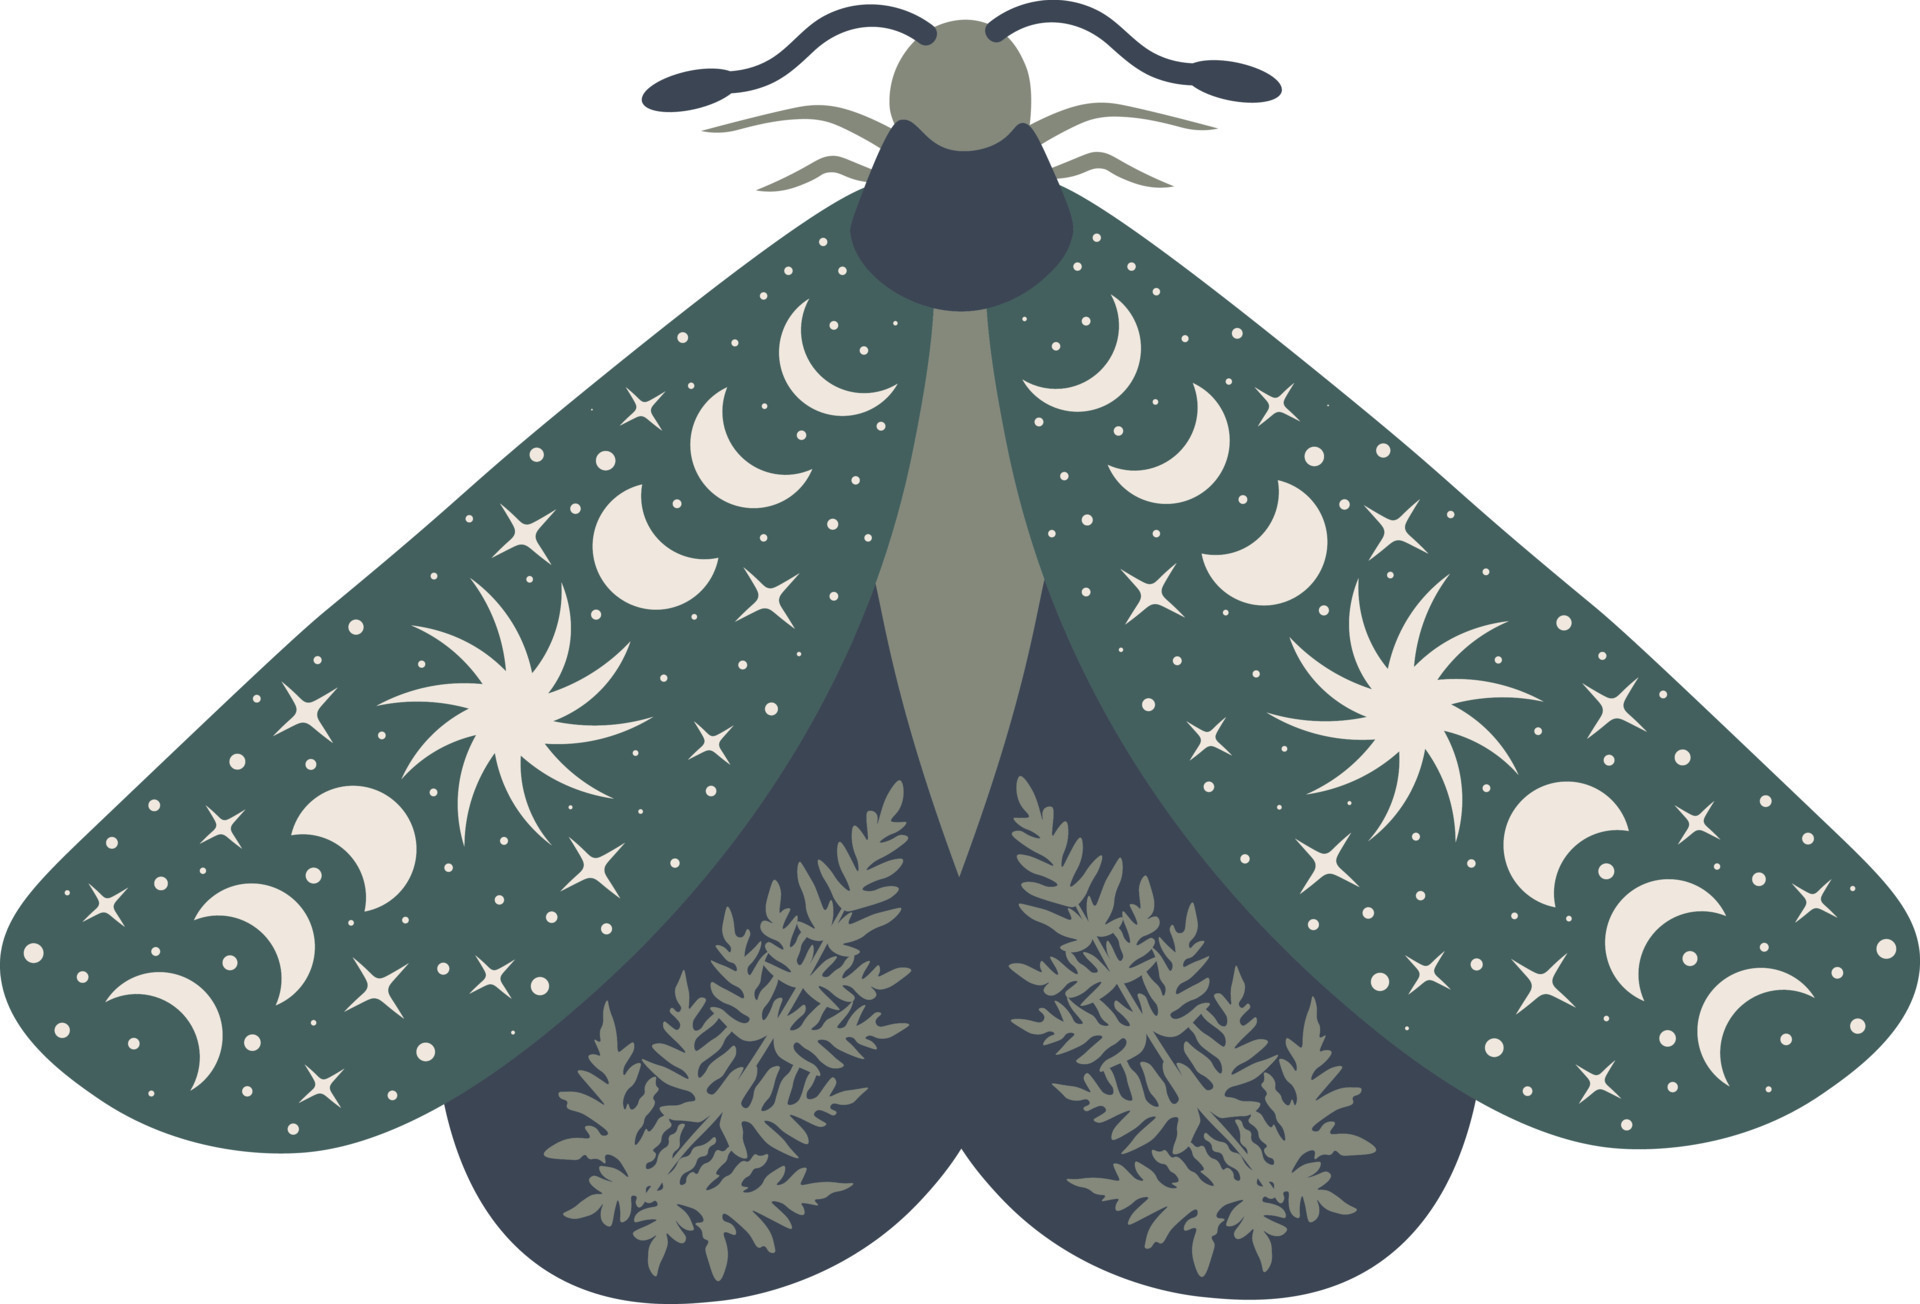 https://static.vecteezy.com/system/resources/previews/020/634/580/original/celestial-butterfly-illustration-mystical-luna-moth-with-moon-phases-magic-floral-insect-on-white-background-design-for-boho-poster-card-madical-t-shirt-print-tag-sticker-vector.jpg